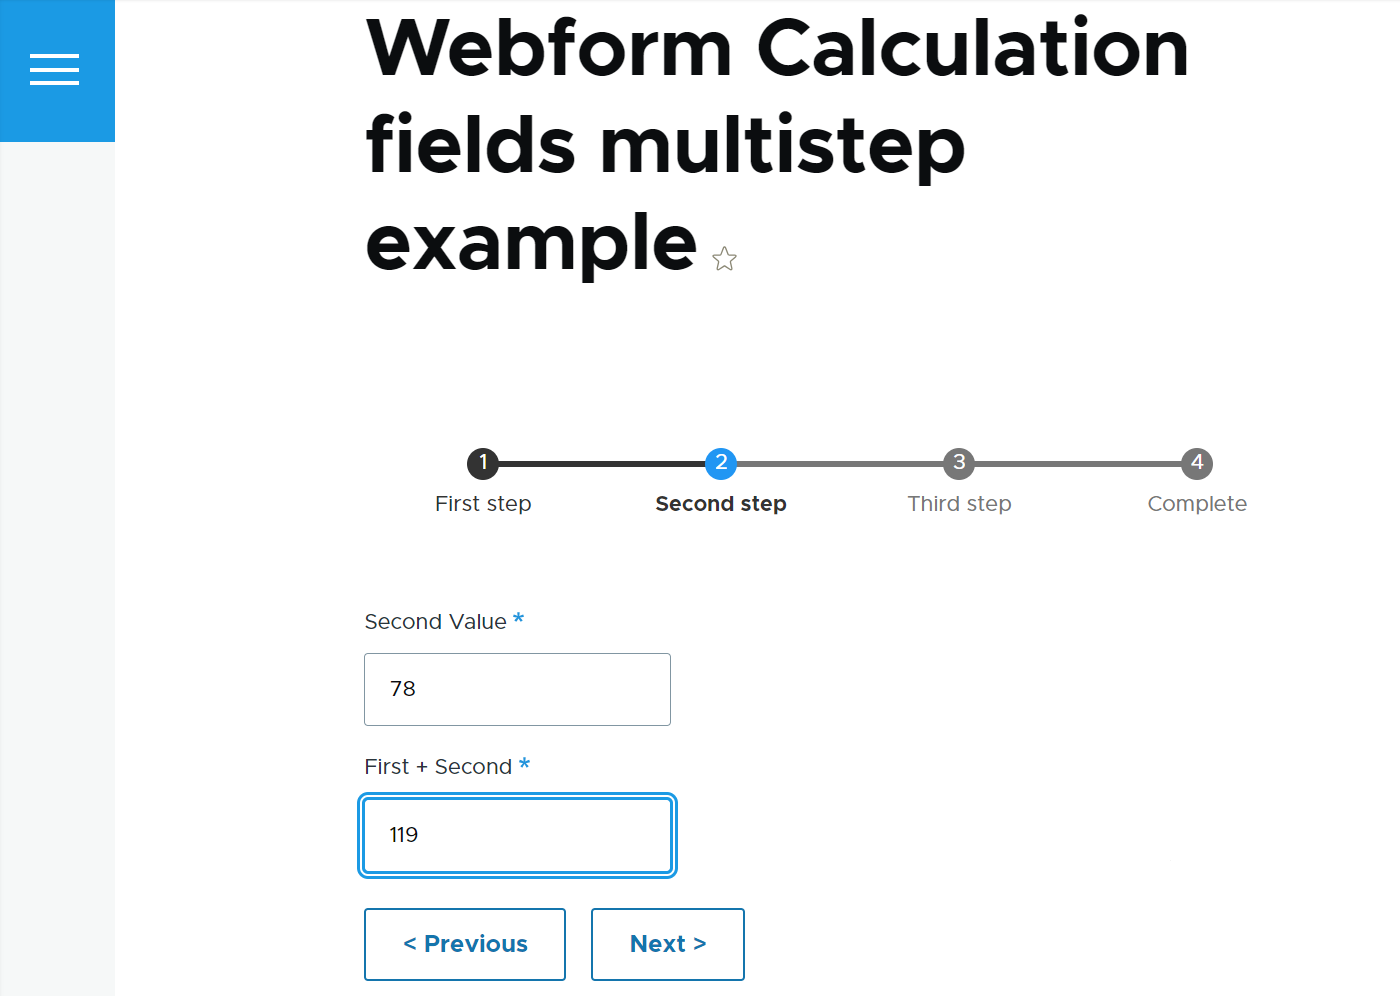 An example of a multistep webform with complex calculations.